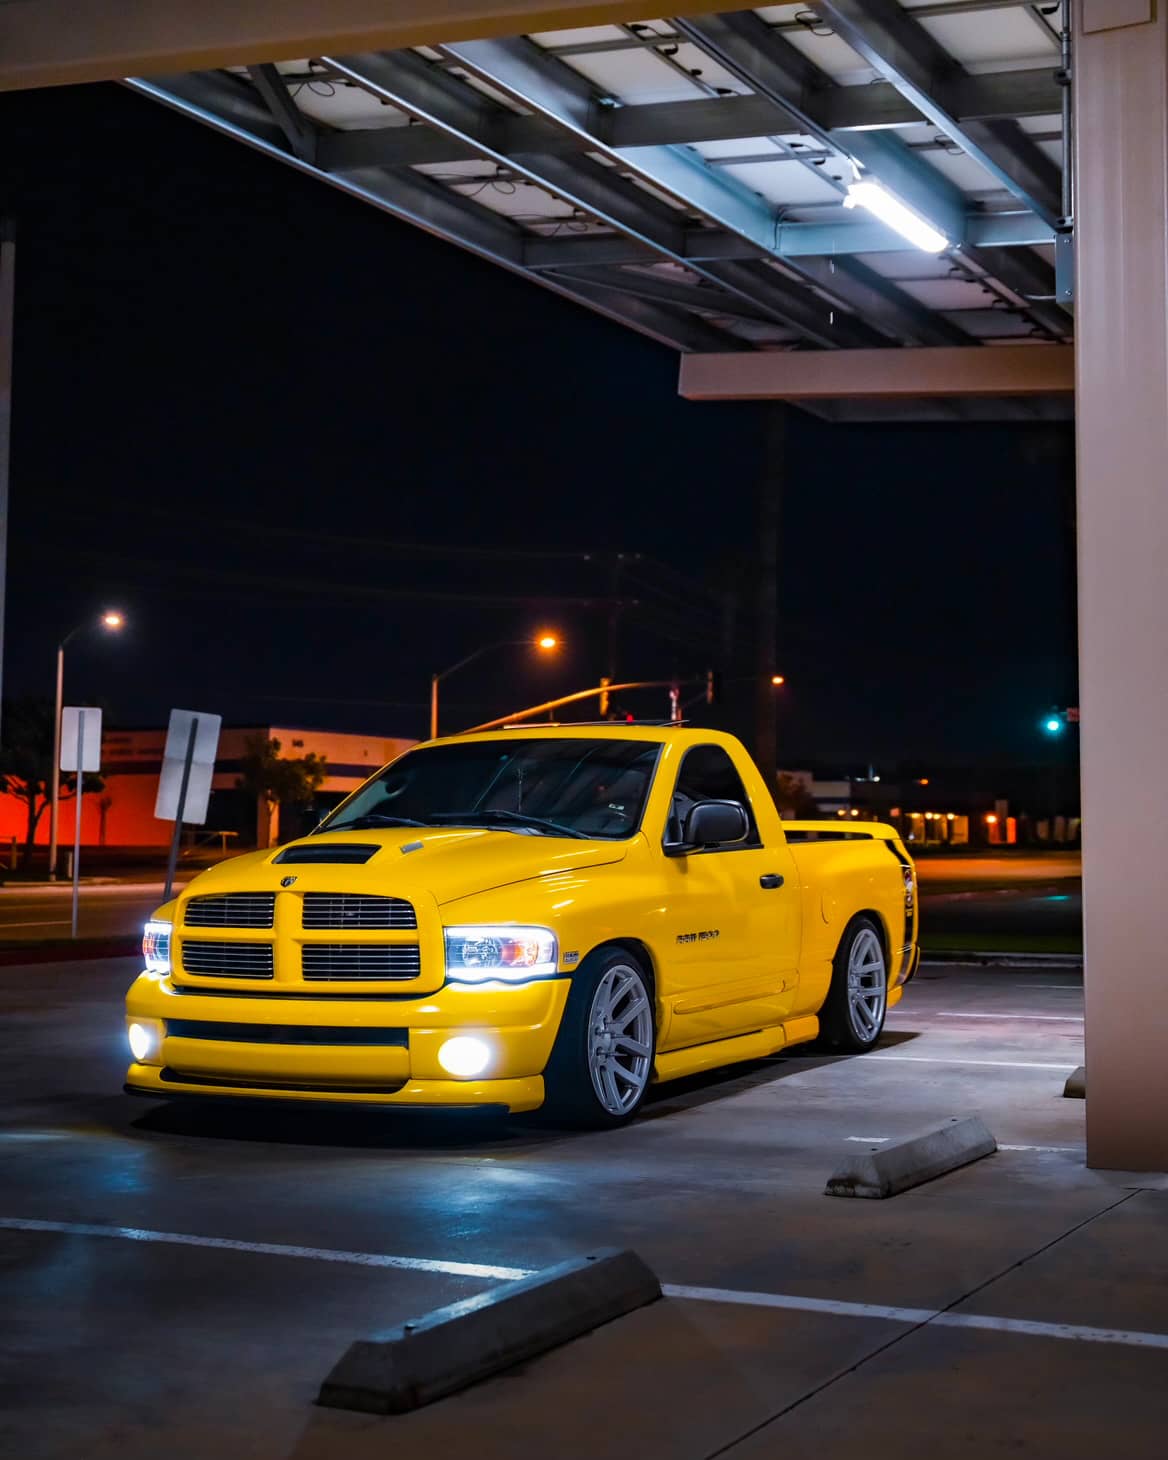 Modified Dodge Ram 150 Rubmblebee with lowered suspension and and LED lights